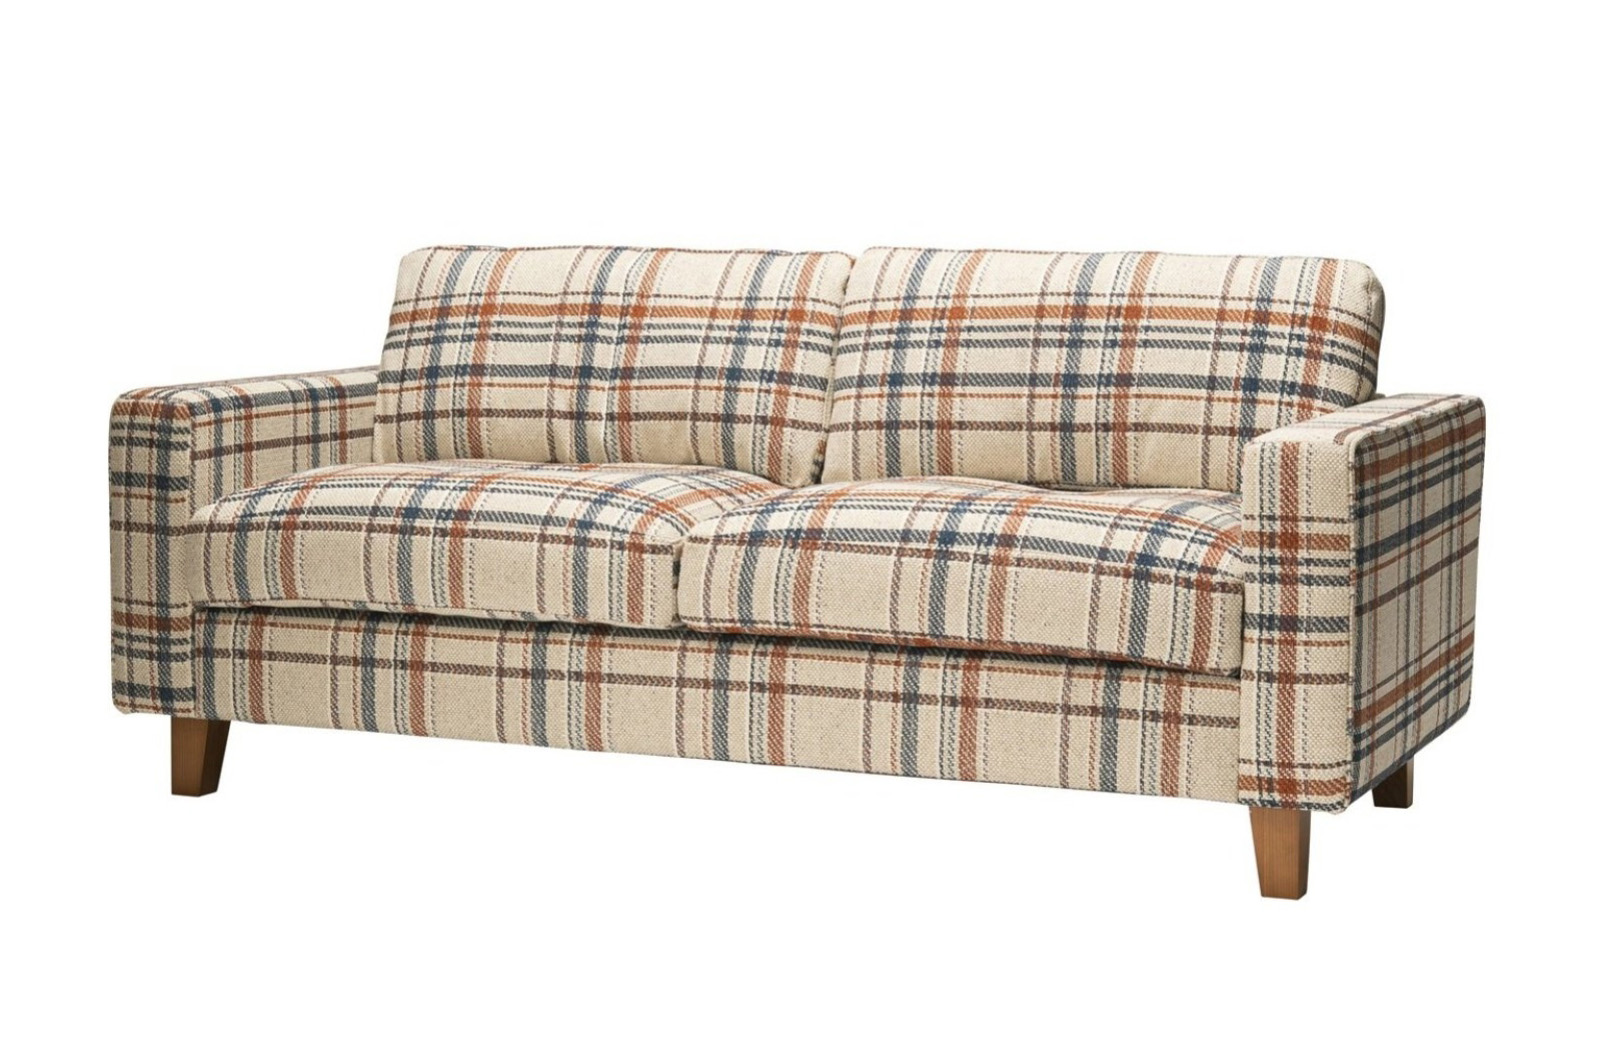 ACME Furniture アクメファニチャー JETTY feather SOFA 2.5SEATER AC 